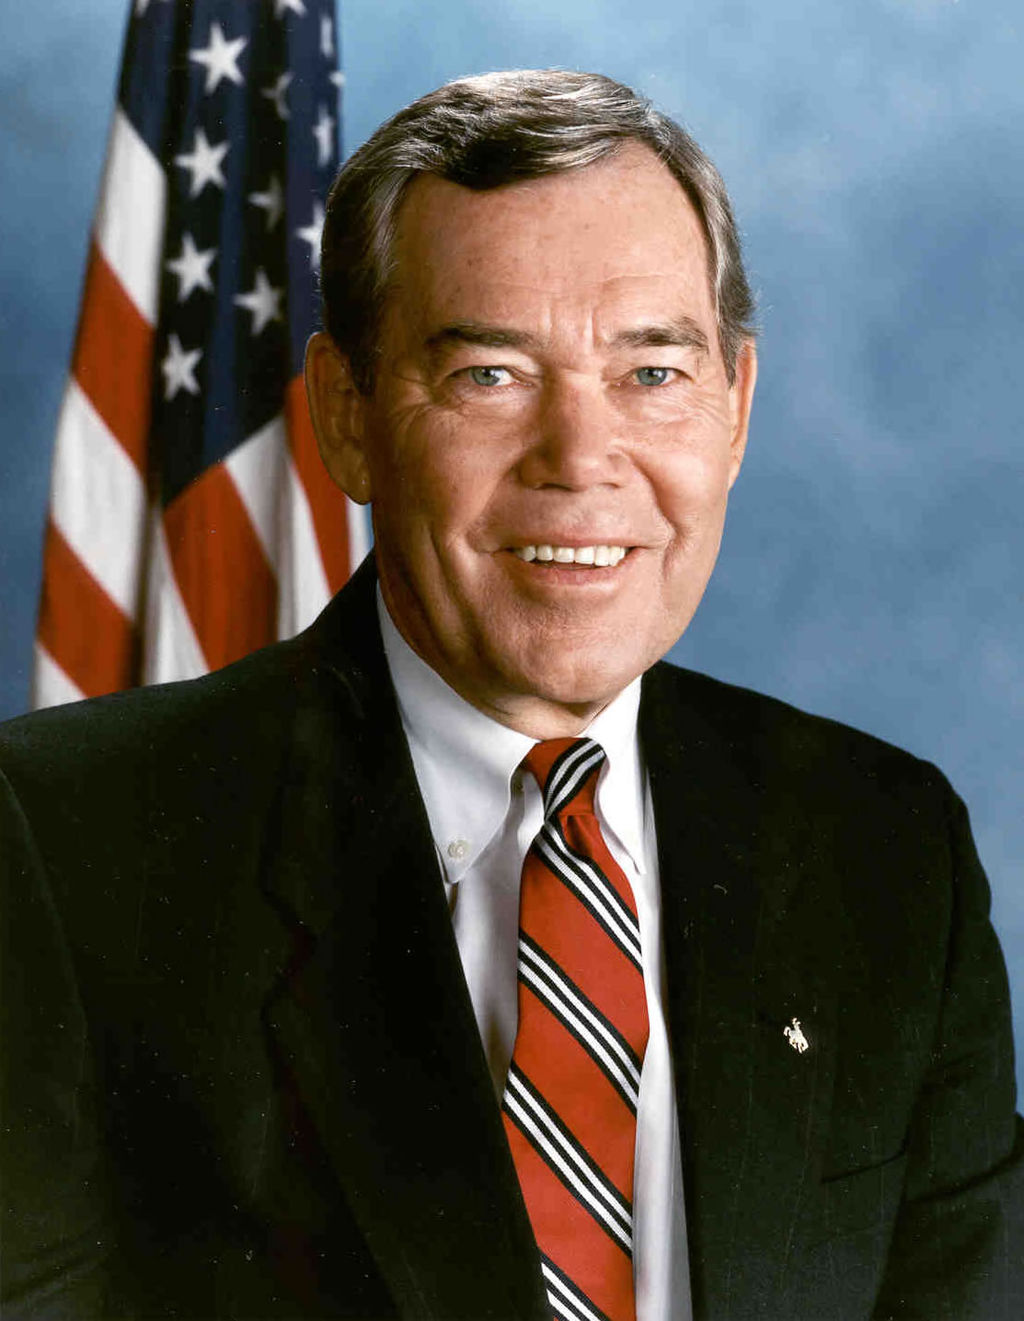 Smiling White man in black suit and red tie, American flag behind.